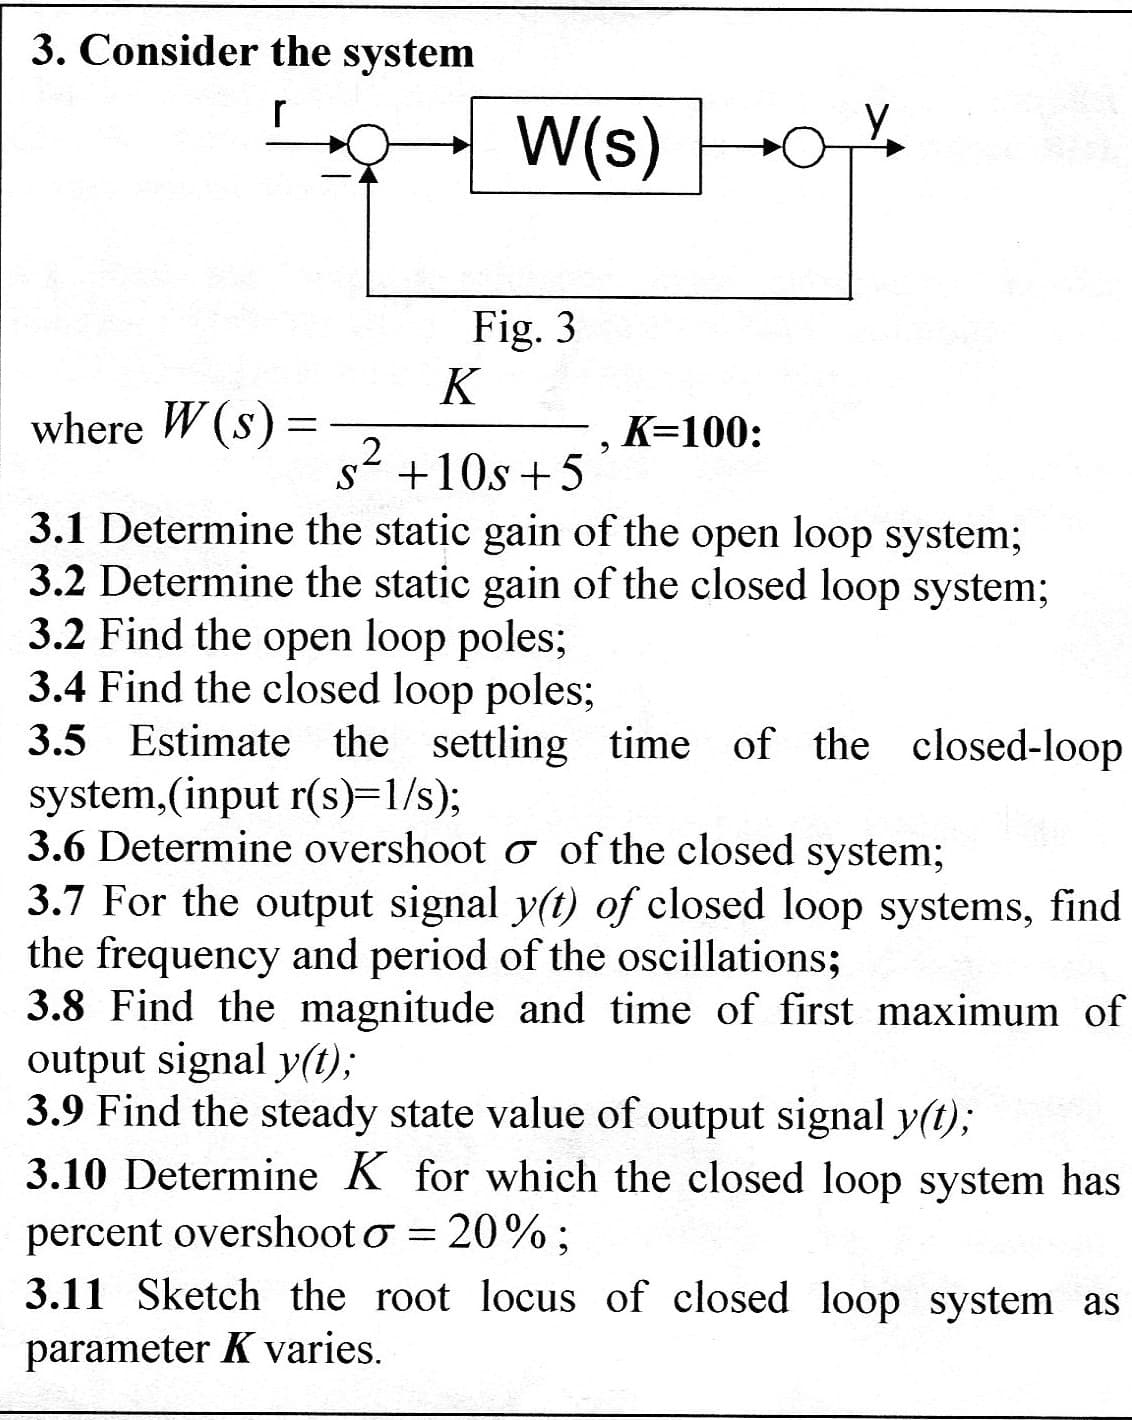 3. Consider the system
r
where W(s) =
=
2
W(s)
S
Fig. 3
K
, K=100:
+10s +5
3.1 Determine the static gain of the open loop system;
3.2 Determine the static gain of the closed loop system;
3.2 Find the open loop poles;
3.4 Find the closed loop poles;
3.5 Estimate the settling time of the closed-loop
system, (input r(s)=1/s);
3.6 Determine overshoot o of the closed system;
3.7 For the output signal y(t) of closed loop systems, find
the frequency and period of the oscillations;
3.8 Find the magnitude and time of first maximum of
output signal y(t);
3.9 Find the steady state value of output signal y(t);
3.10 Determine K for which the closed loop system has
percent overshoot o = 20%:
3.11 Sketch the root locus of closed loop system as
parameter K varies.